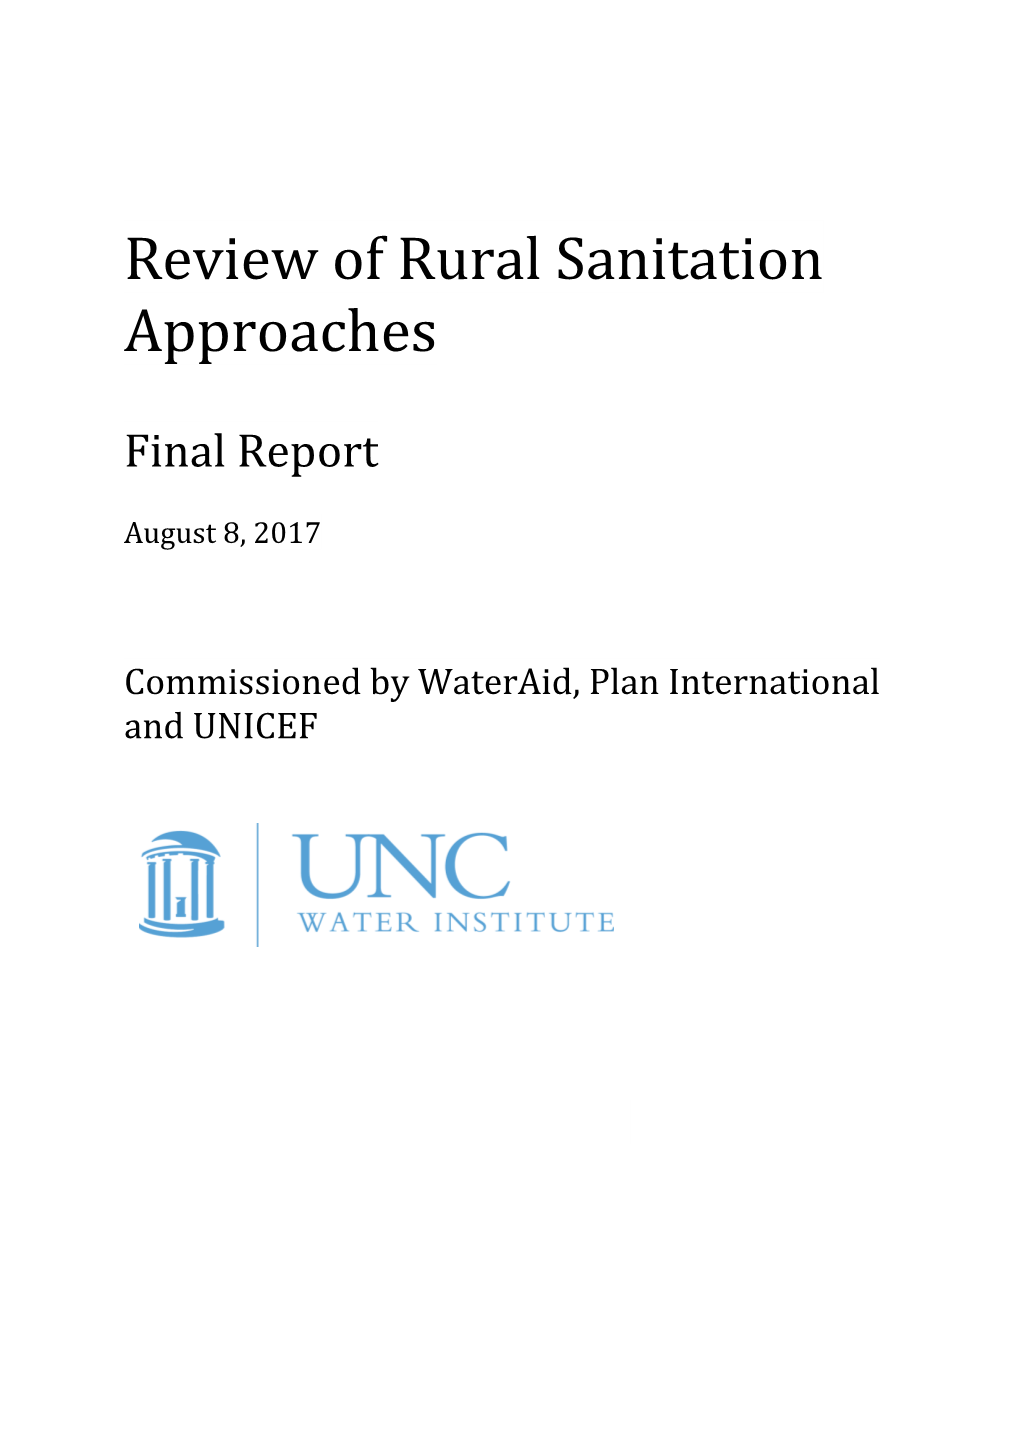 Review of Rural Sanitation Approaches